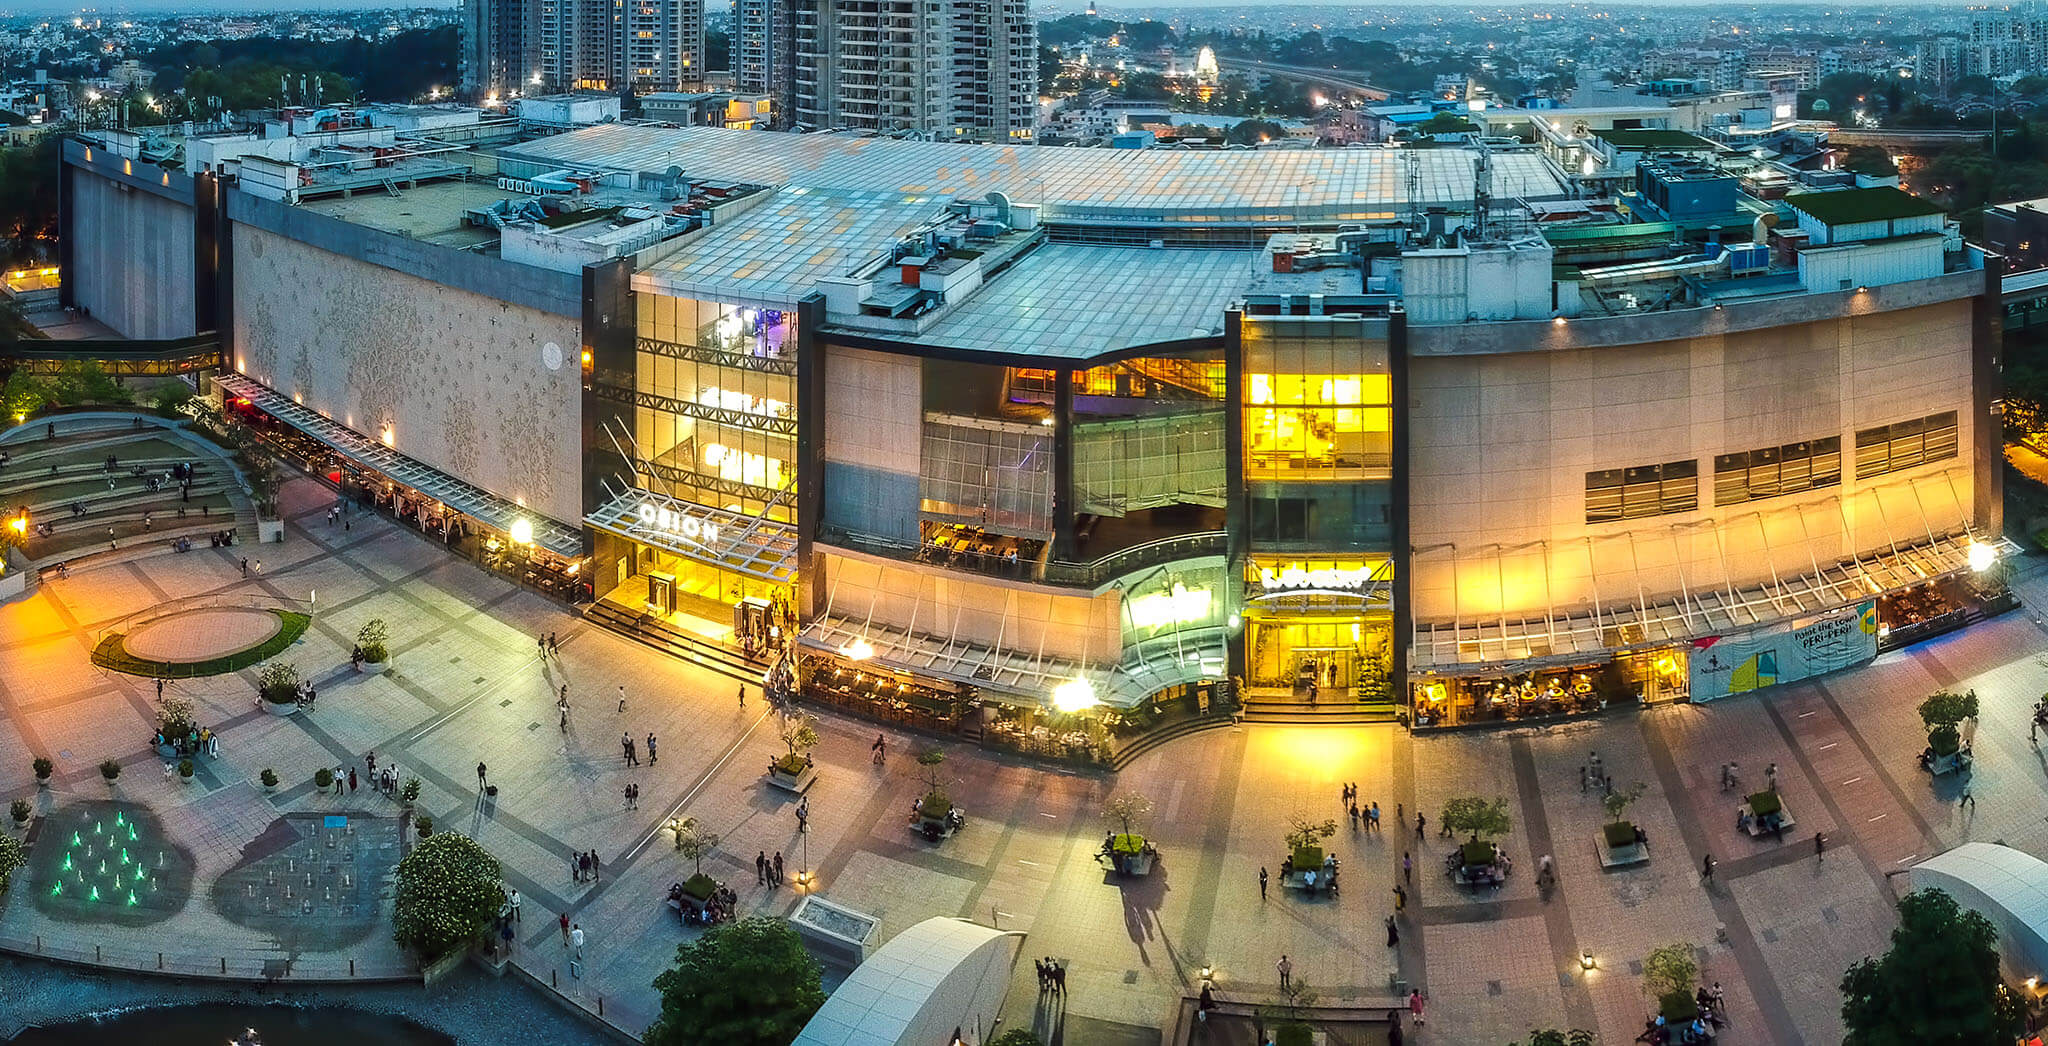 Top 10 Shopping Malls in Bangalore | Biggest & Best Malls in Bangalore